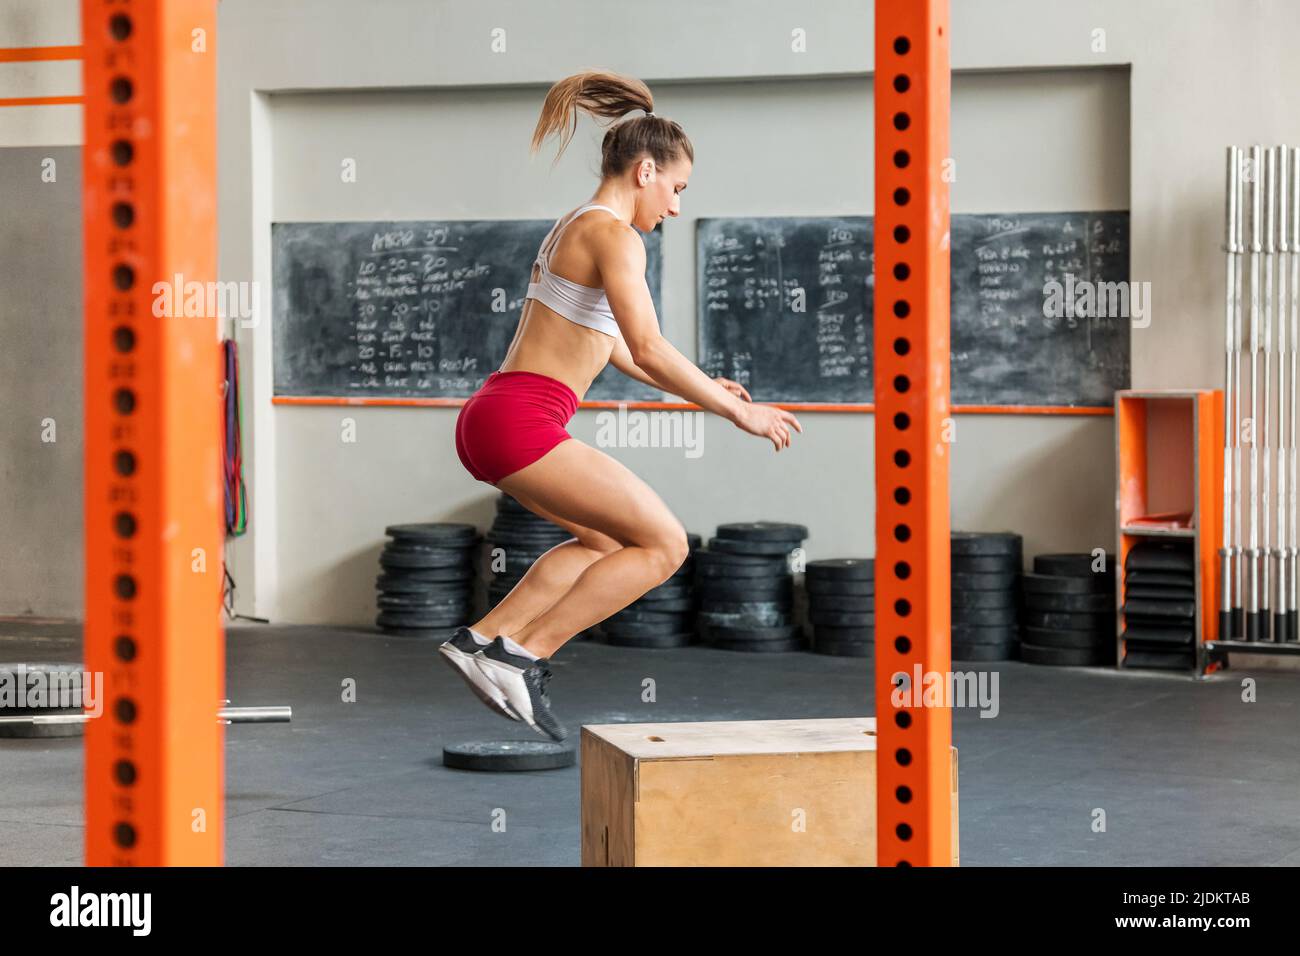 Atletic young woman doing a Crossfit box jump exercise in a gym in a health and fitness concept Stock Photo